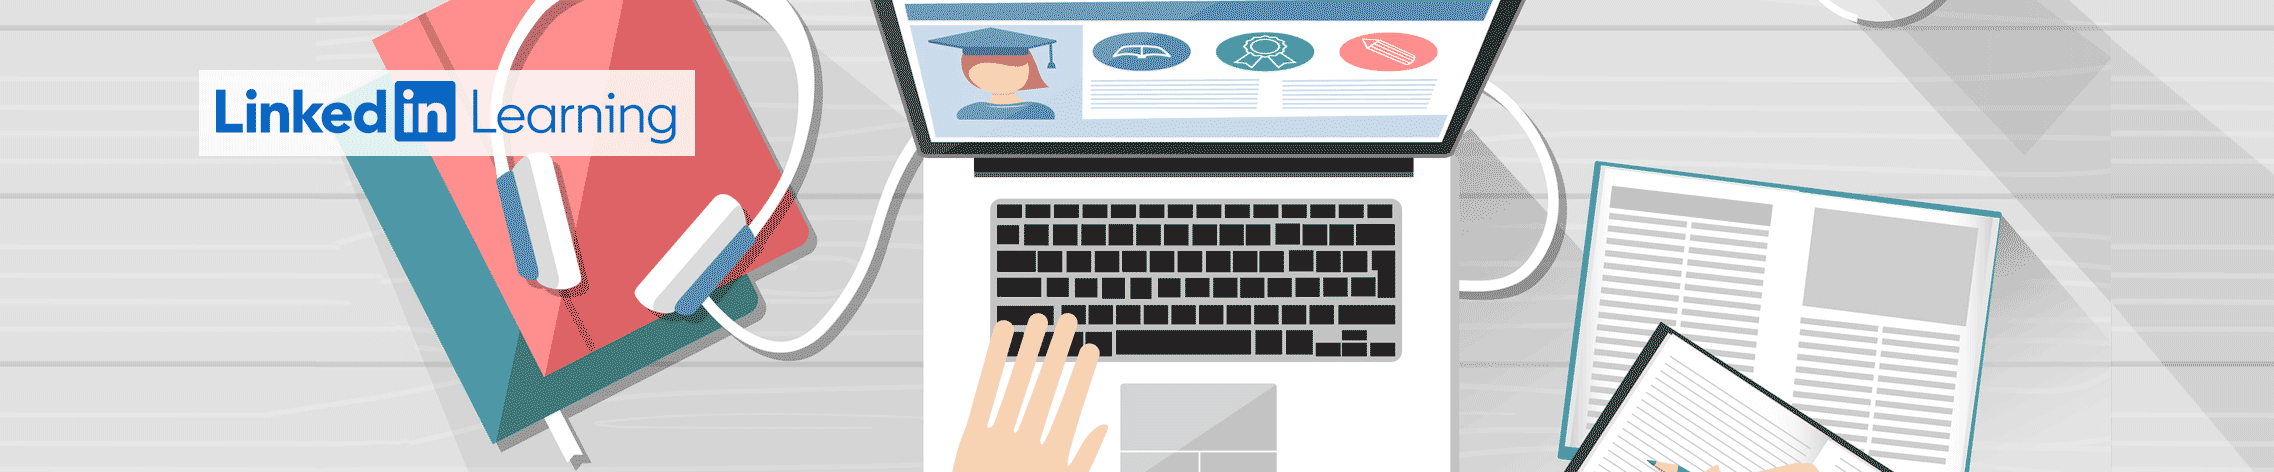 Illustration of a desk, top down, with a hands on a laptop viewing an online course. Logo on image, LinkedIn Learning